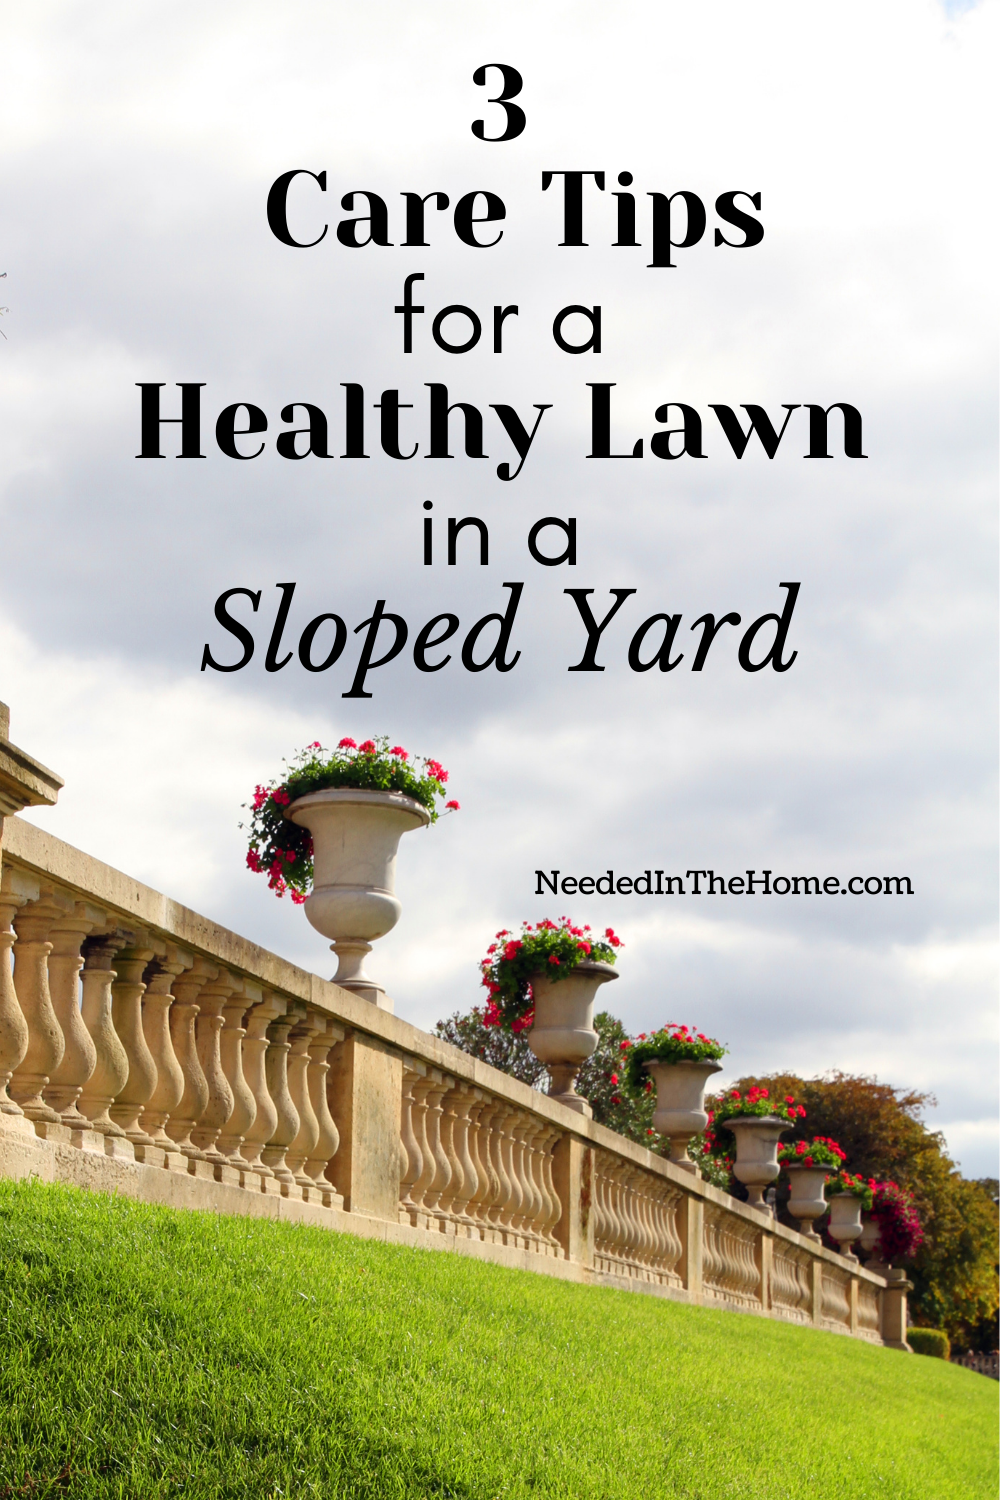 pinterest-pin-description 3 care tips for a healthy lawn in a sloped yard cement fence flower pots flowers angled yard grass neededinthehome